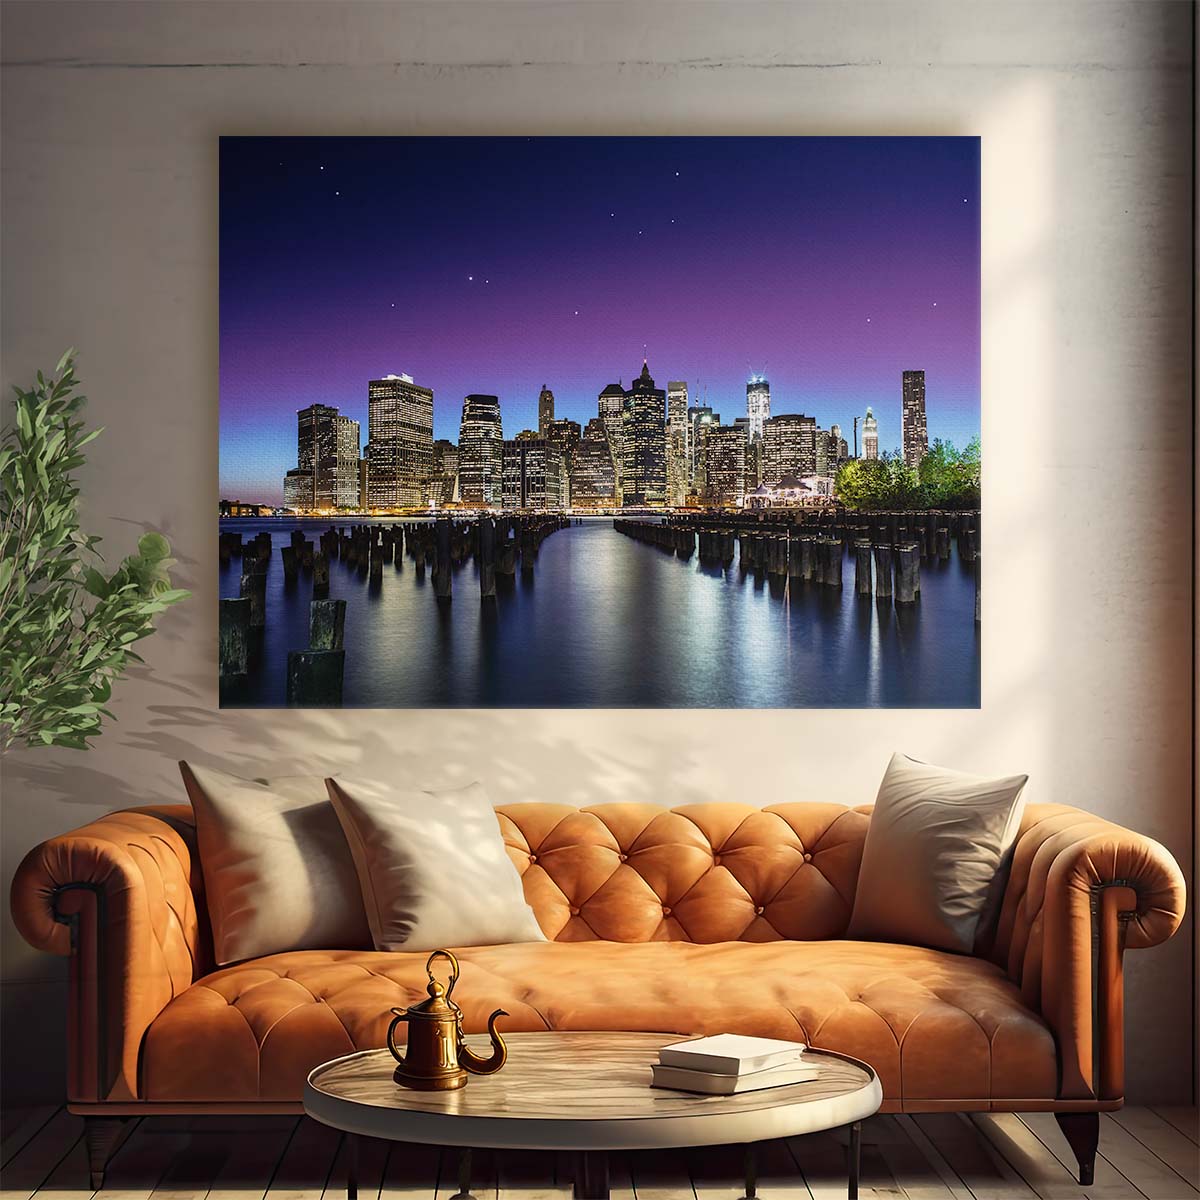 Manhattan Skyline at Night NYC Cityscape Wall Art by Luxuriance Designs. Made in USA.